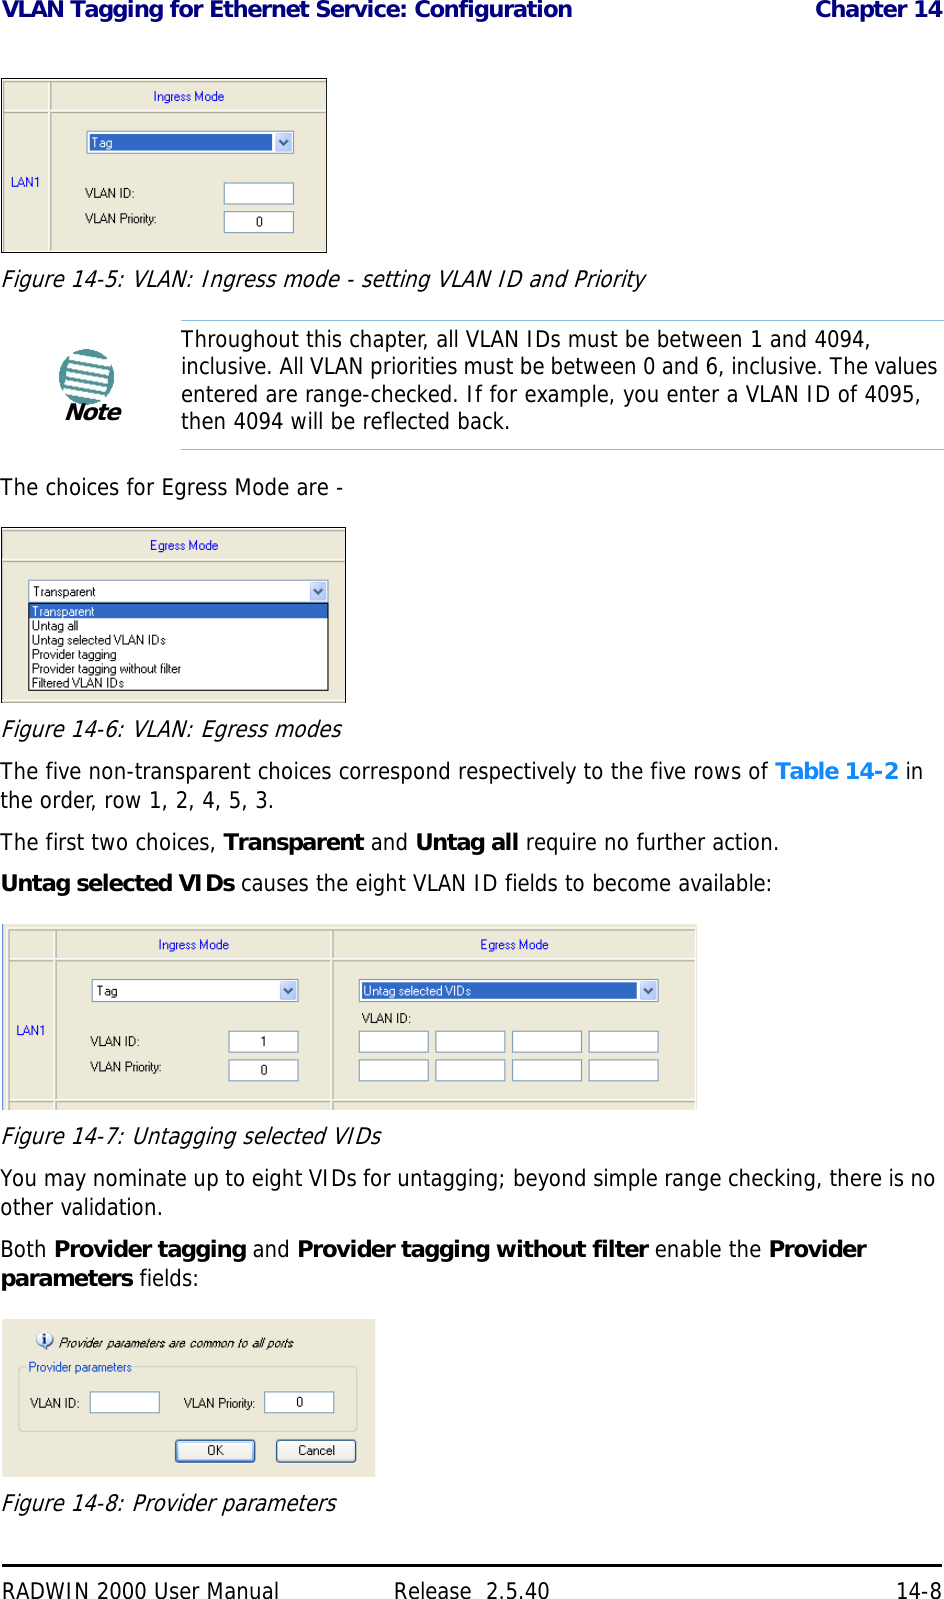 VLAN Tagging for Ethernet Service: Configuration Chapter 14RADWIN 2000 User Manual Release  2.5.40 14-8Figure 14-5: VLAN: Ingress mode - setting VLAN ID and PriorityThe choices for Egress Mode are - Figure 14-6: VLAN: Egress modesThe five non-transparent choices correspond respectively to the five rows of Table 14-2 in the order, row 1, 2, 4, 5, 3.The first two choices, Transparent and Untag all require no further action.Untag selected VIDs causes the eight VLAN ID fields to become available:Figure 14-7: Untagging selected VIDsYou may nominate up to eight VIDs for untagging; beyond simple range checking, there is no other validation.Both Provider tagging and Provider tagging without filter enable the Provider parameters fields:Figure 14-8: Provider parametersNoteThroughout this chapter, all VLAN IDs must be between 1 and 4094, inclusive. All VLAN priorities must be between 0 and 6, inclusive. The values entered are range-checked. If for example, you enter a VLAN ID of 4095, then 4094 will be reflected back.